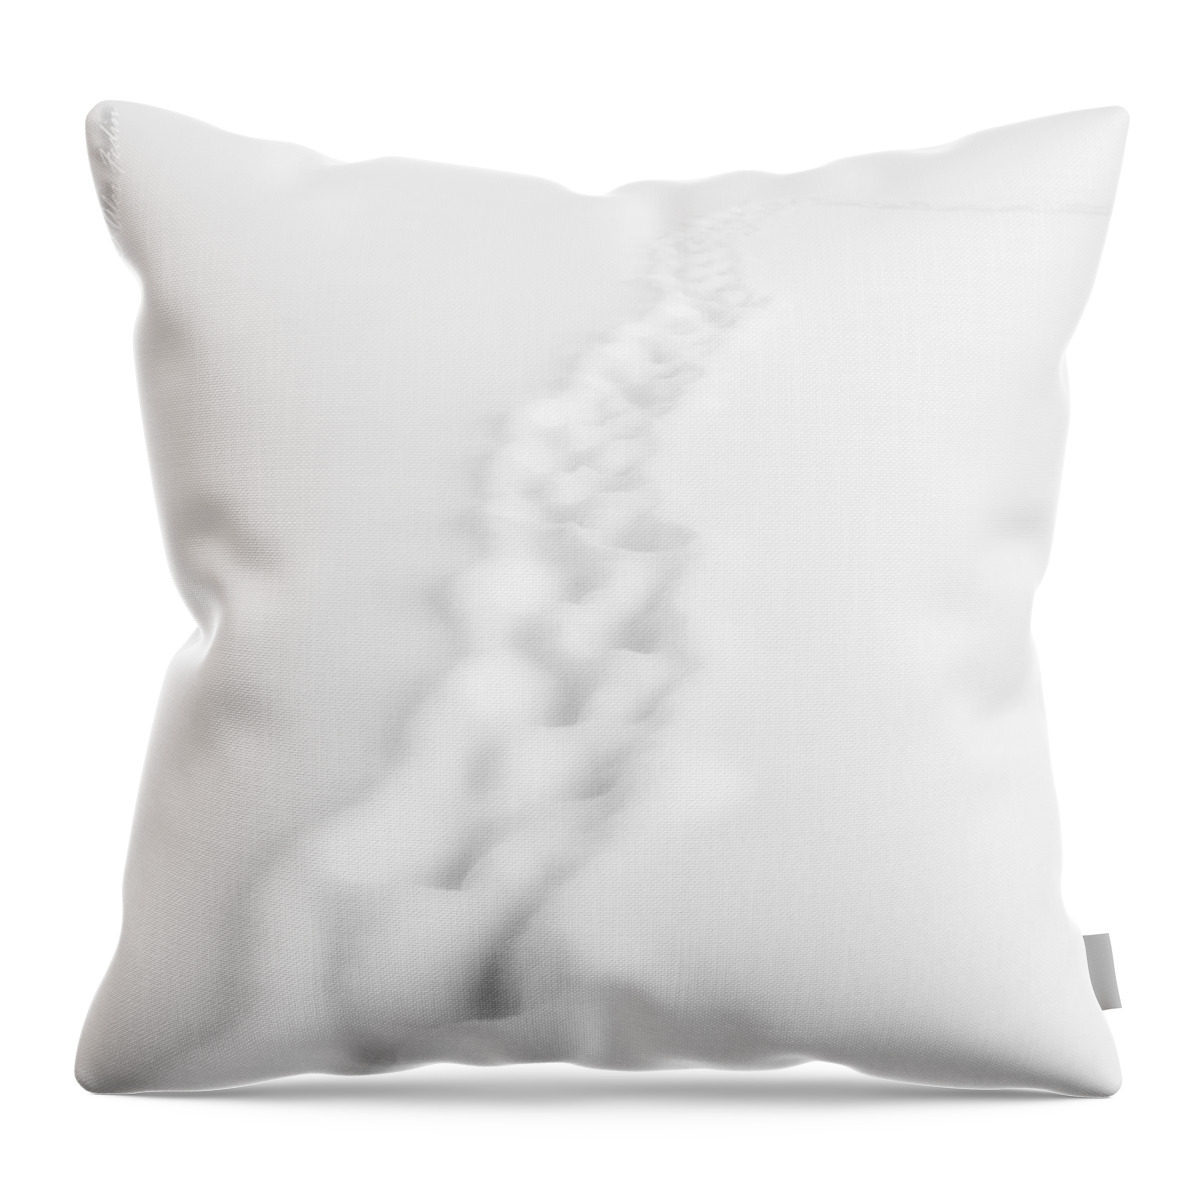 Landscape Throw Pillow featuring the photograph Snow Trail by Alexander Fedin